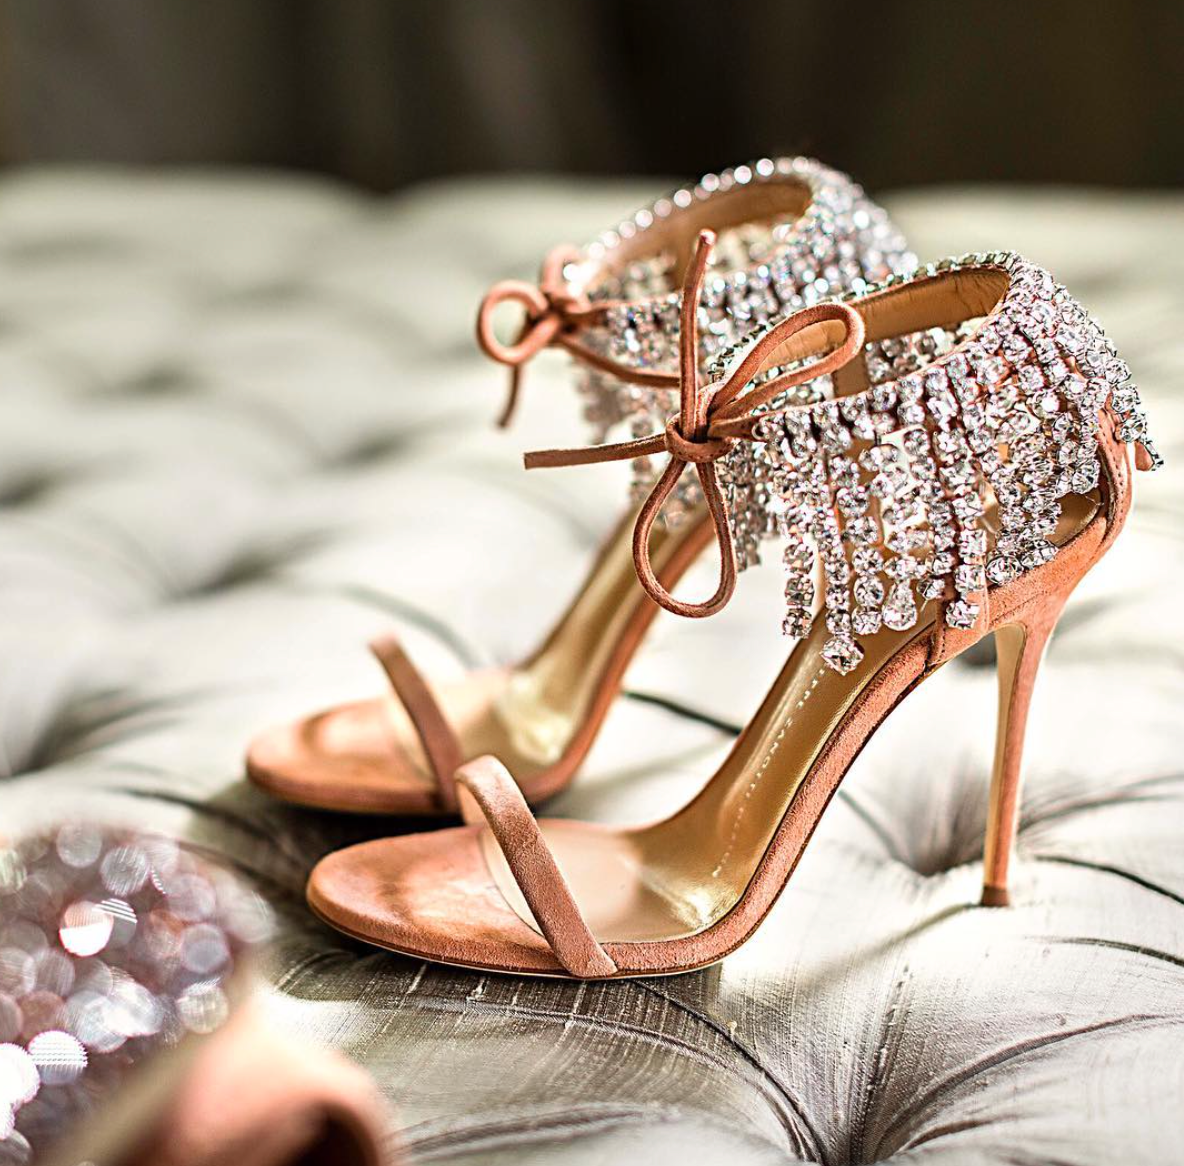 Dazzling Designer Wedding Shoes for the Fashionista Bride-to-Be ...